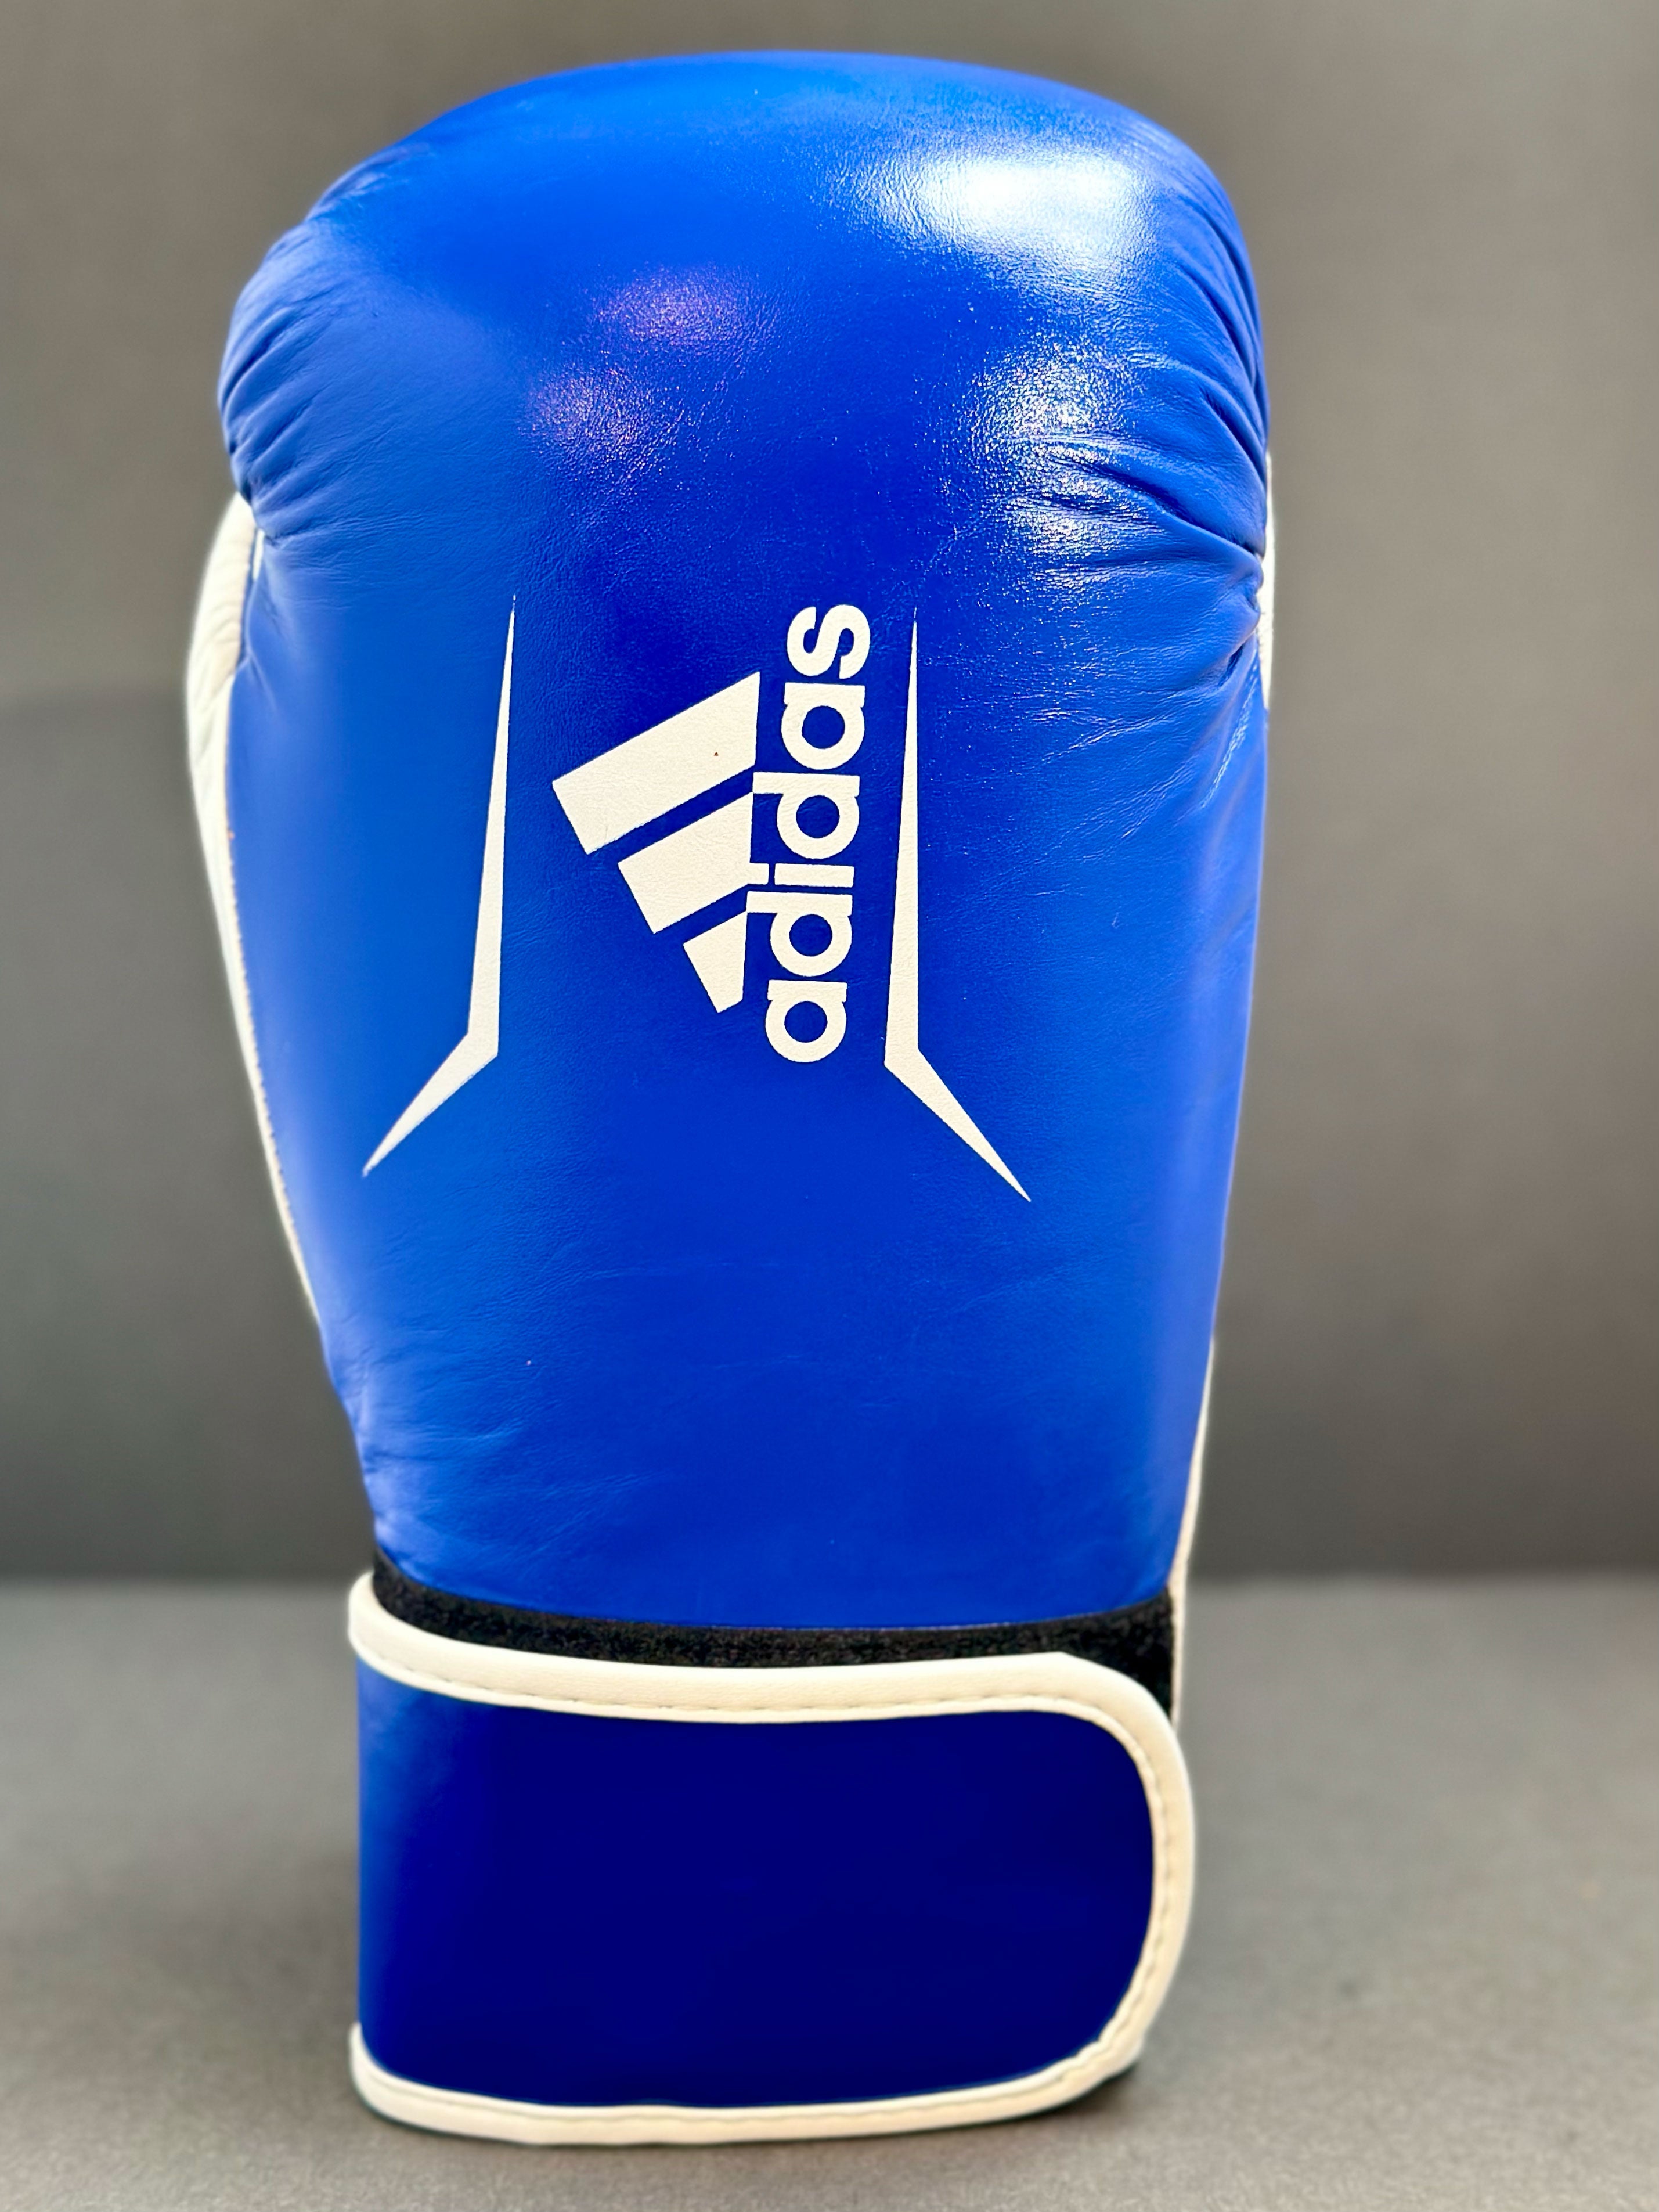 Adidas WAKO Approved Kickboxing Fight Gloves, Cowhide Cuir Leather Speed 165 adiSBG165 Competition Gloves 10 Oz Blue Right Hand